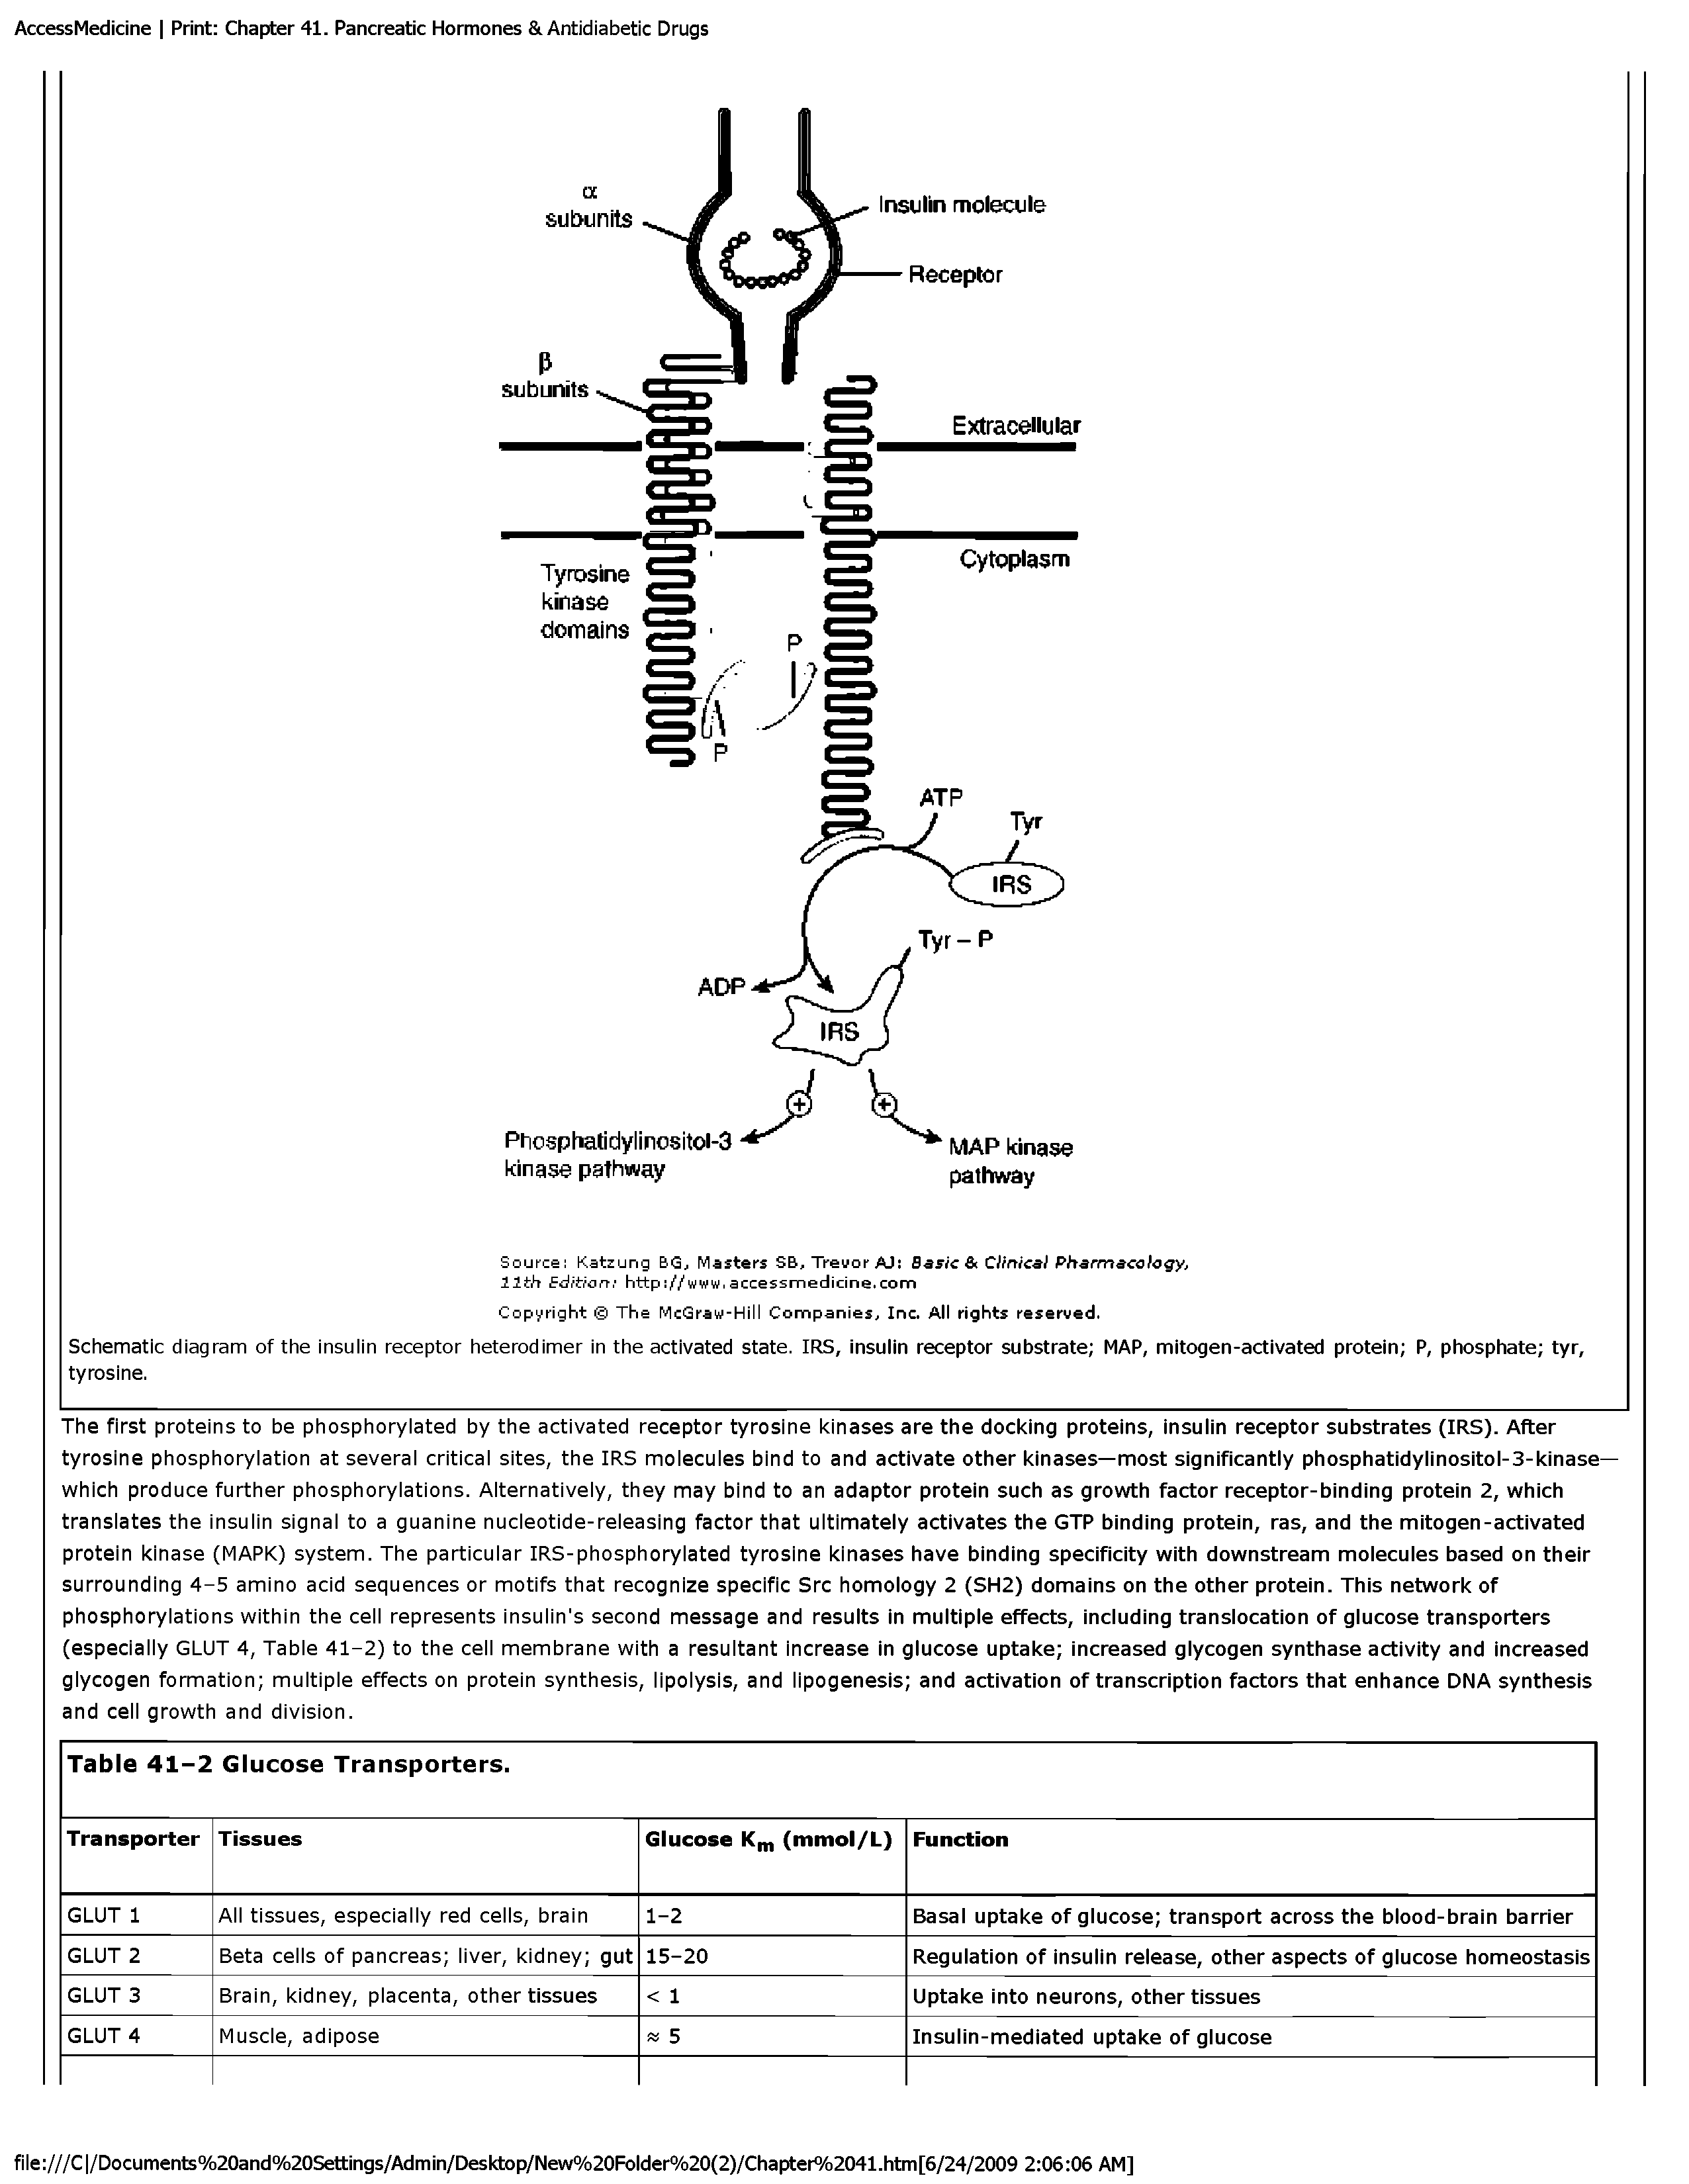 Schematic diagram of the insulin receptor heterodimer in the activated state. IRS, insulin receptor substrate MAP, mitogen-activated protein P, phosphate tyr, tyrosine.